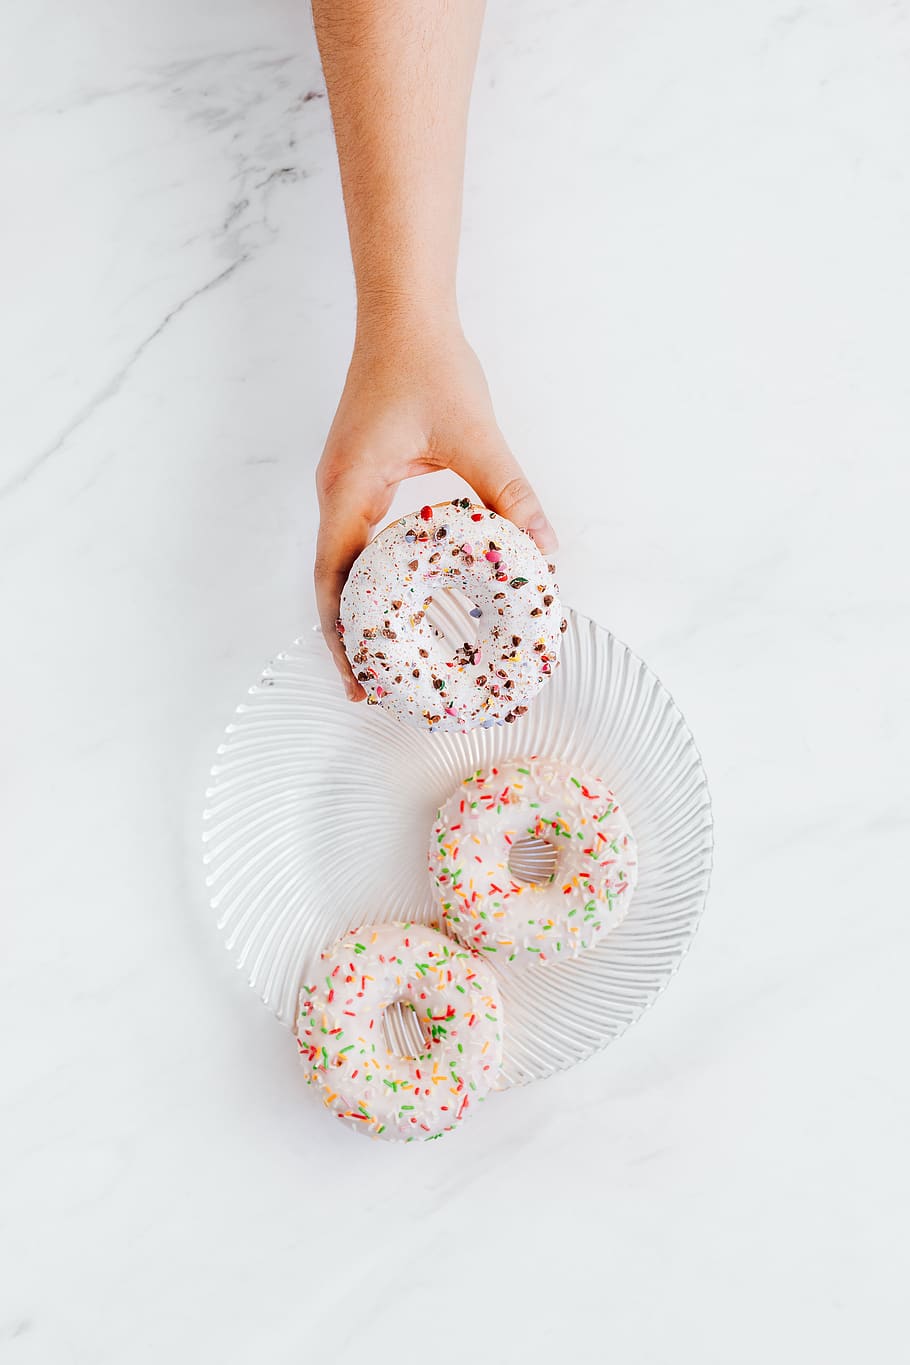 donuts, doughnuts, white, plate, marble, minimal, sweet, Coloured, dunts, glass